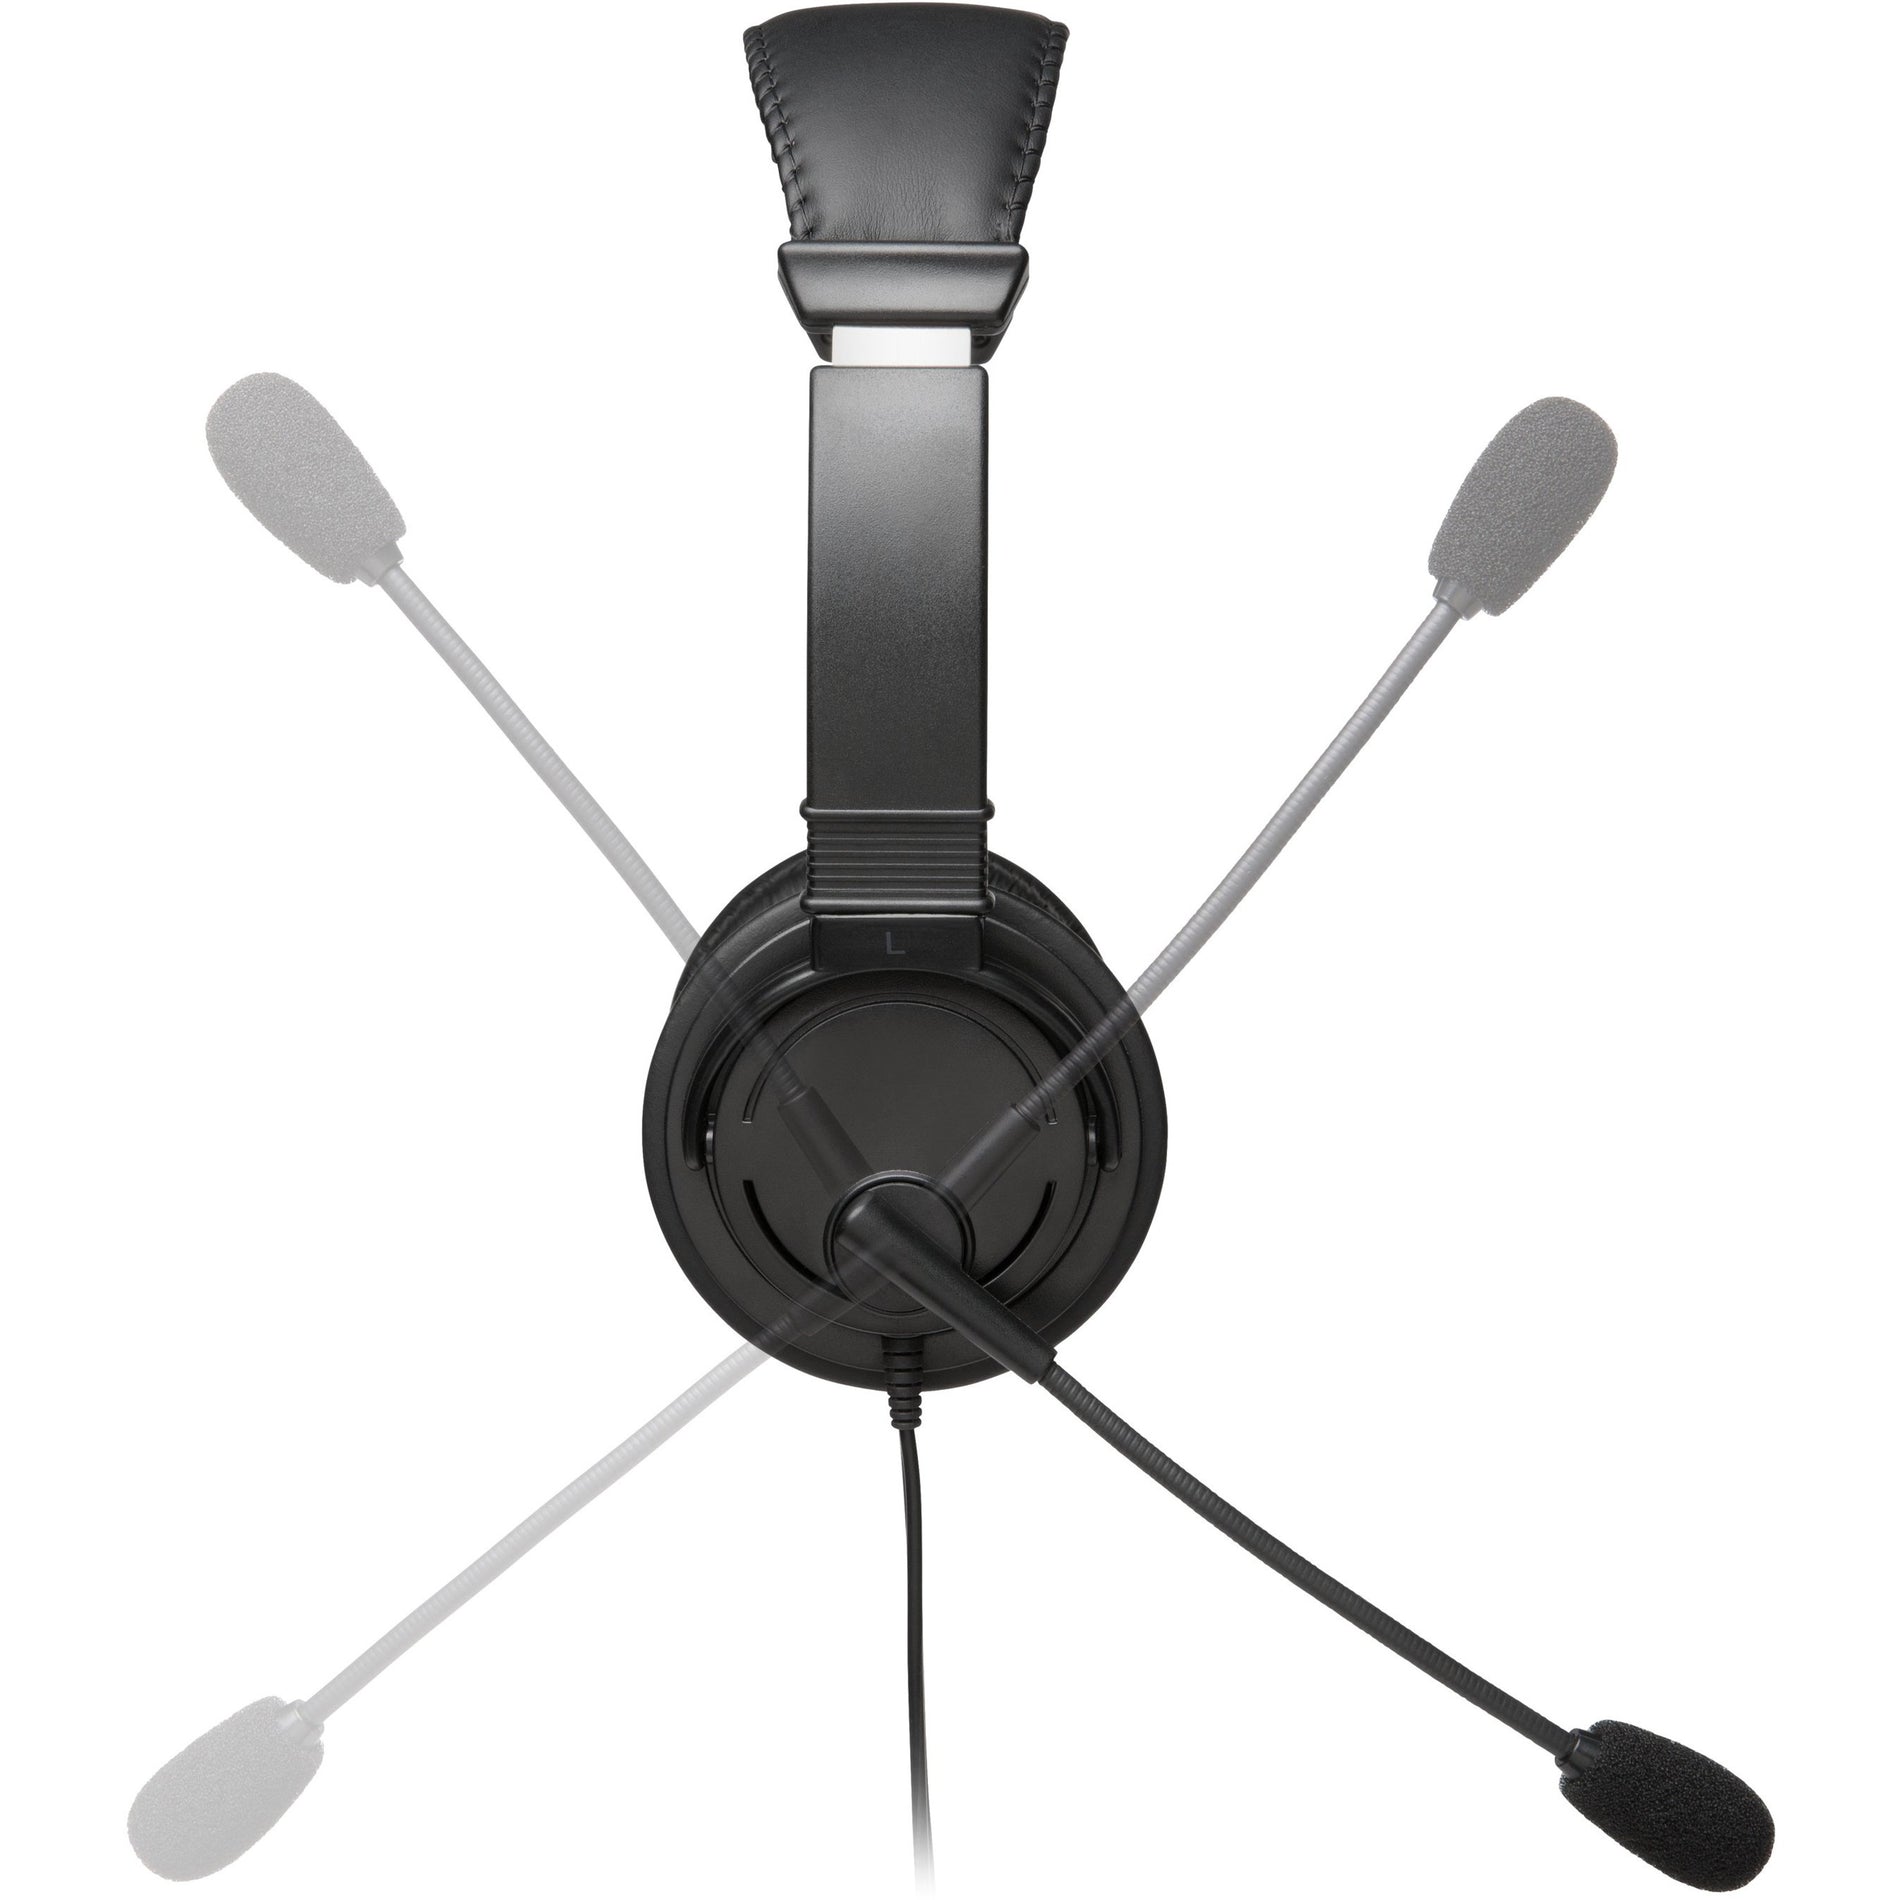 Kensington K97603WW Classic 3.5mm Headset with Mic, Over-the-head, Noise Cancelling